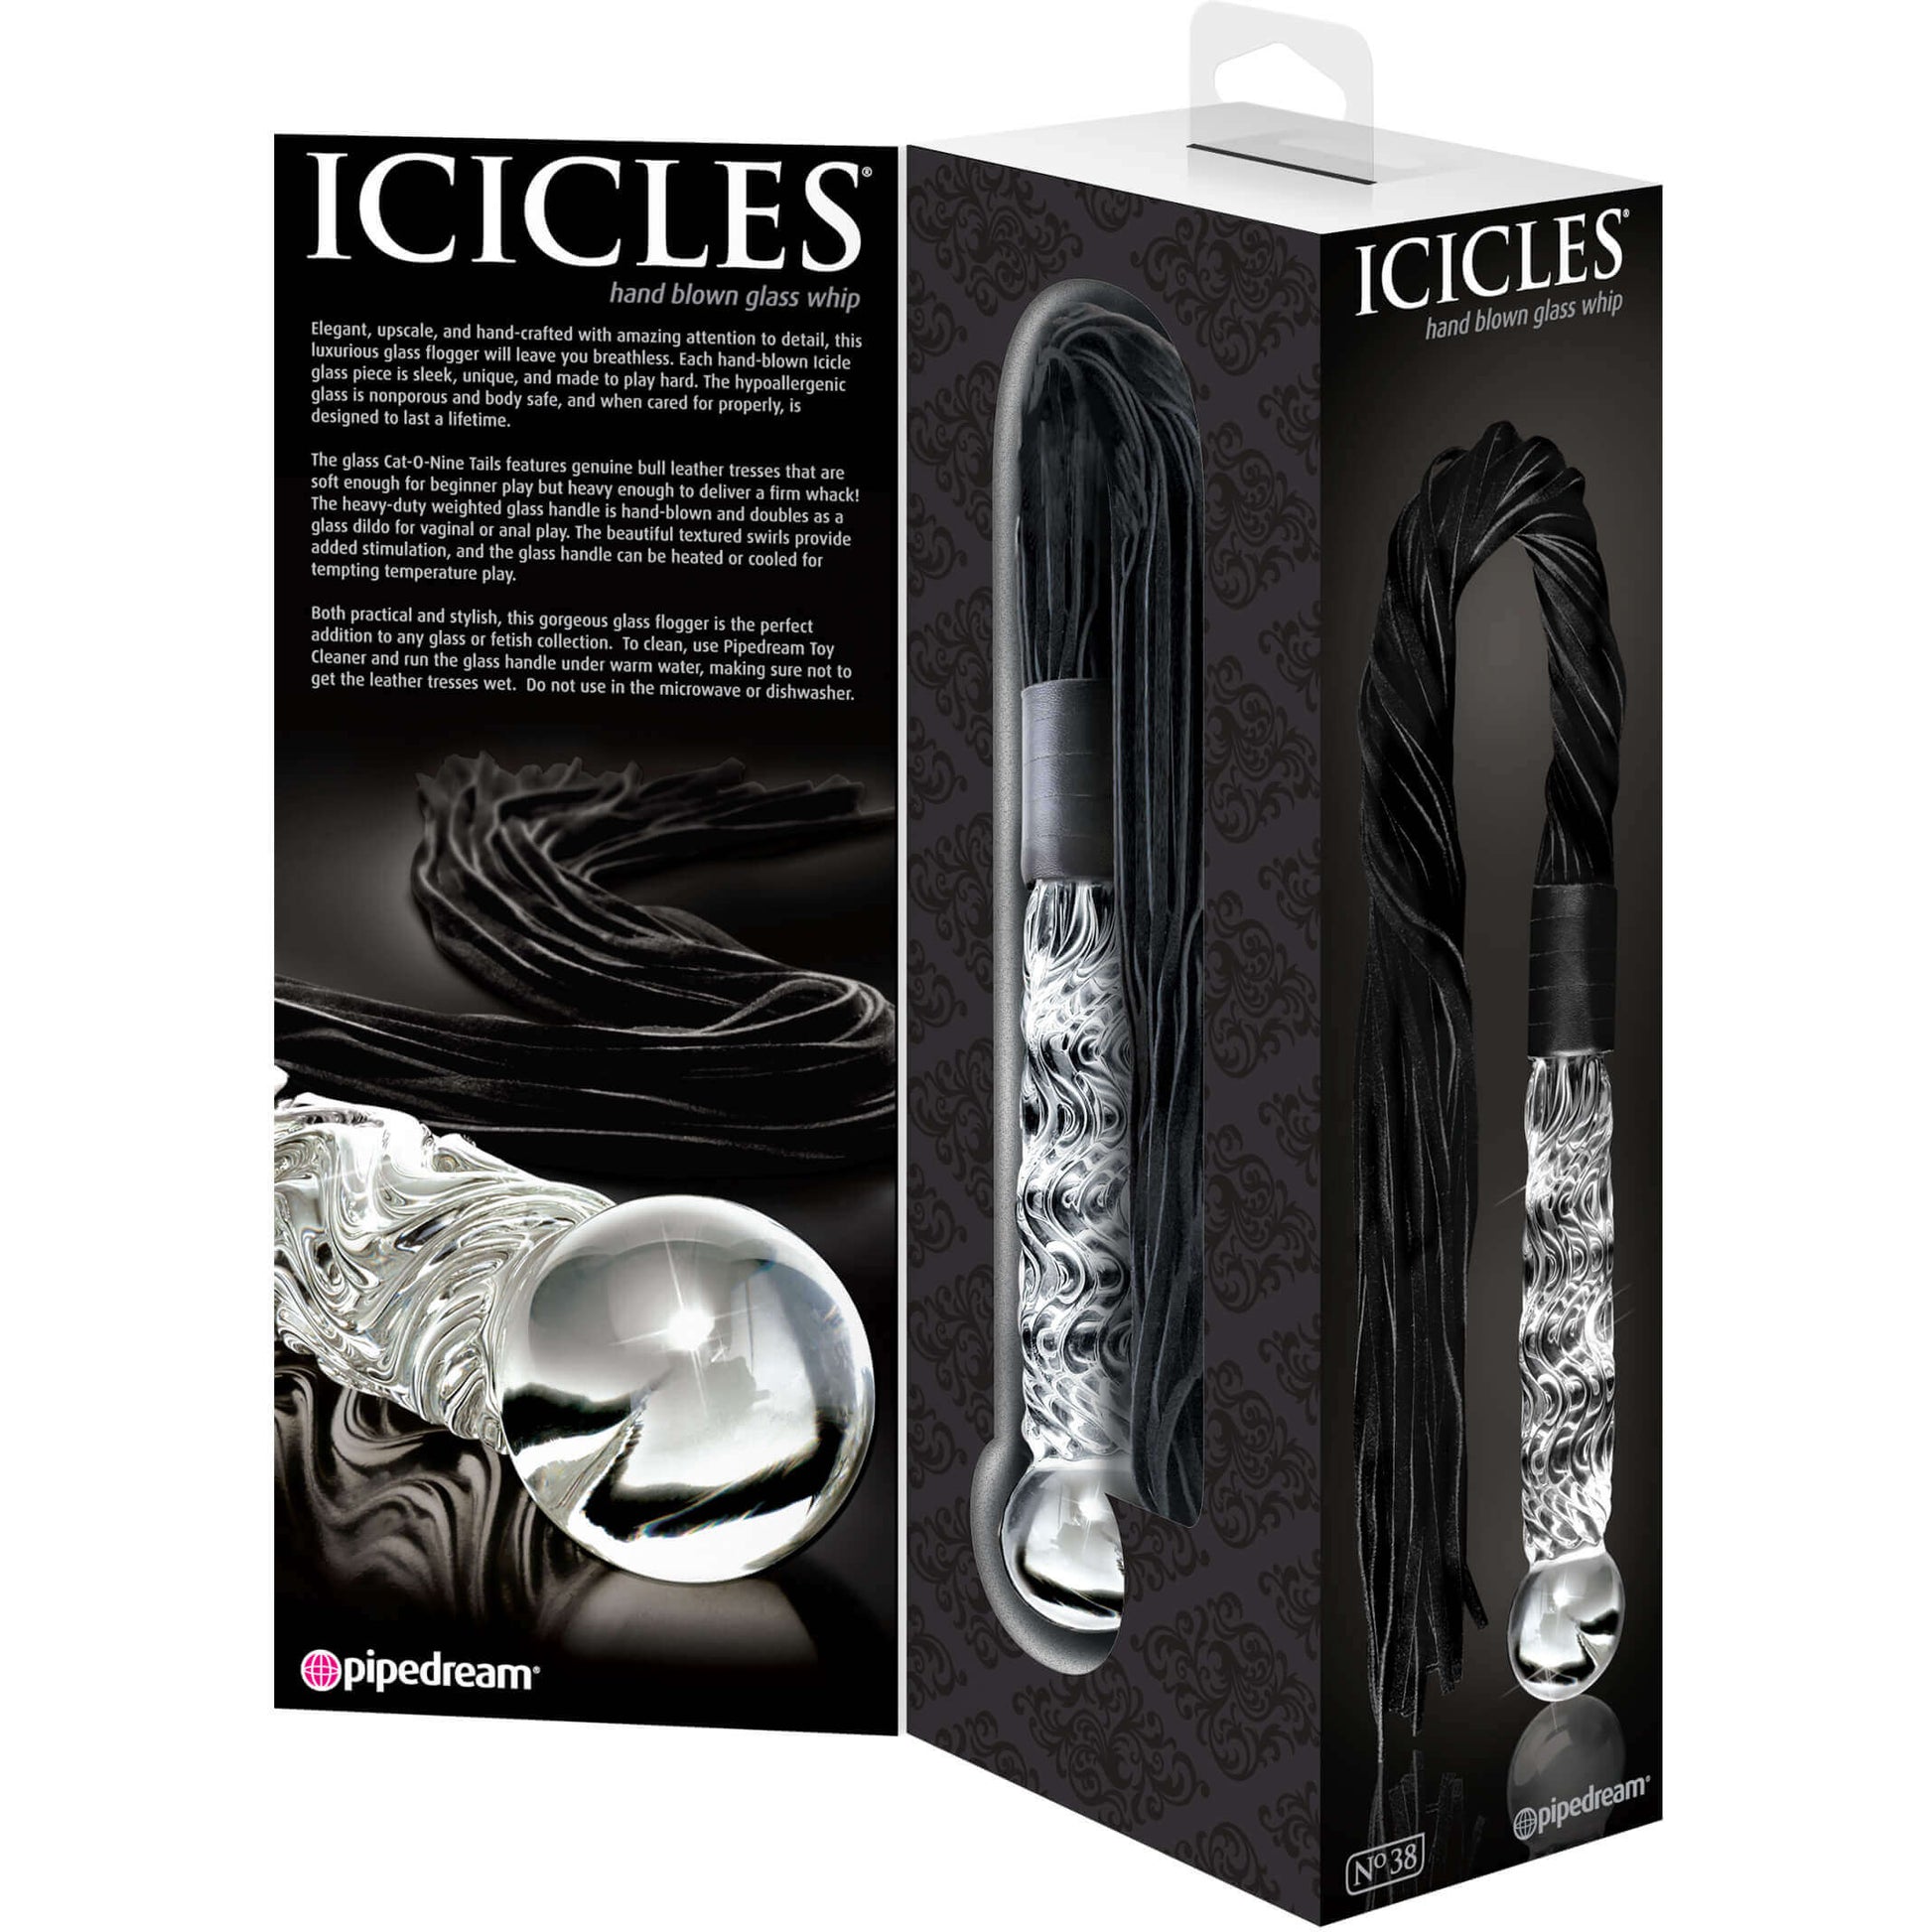 Icicles No. 38 - Glass Flogger and Dildo packaging- by The Bigger O online sex toy shop. USA, Canada and UK shipping available.